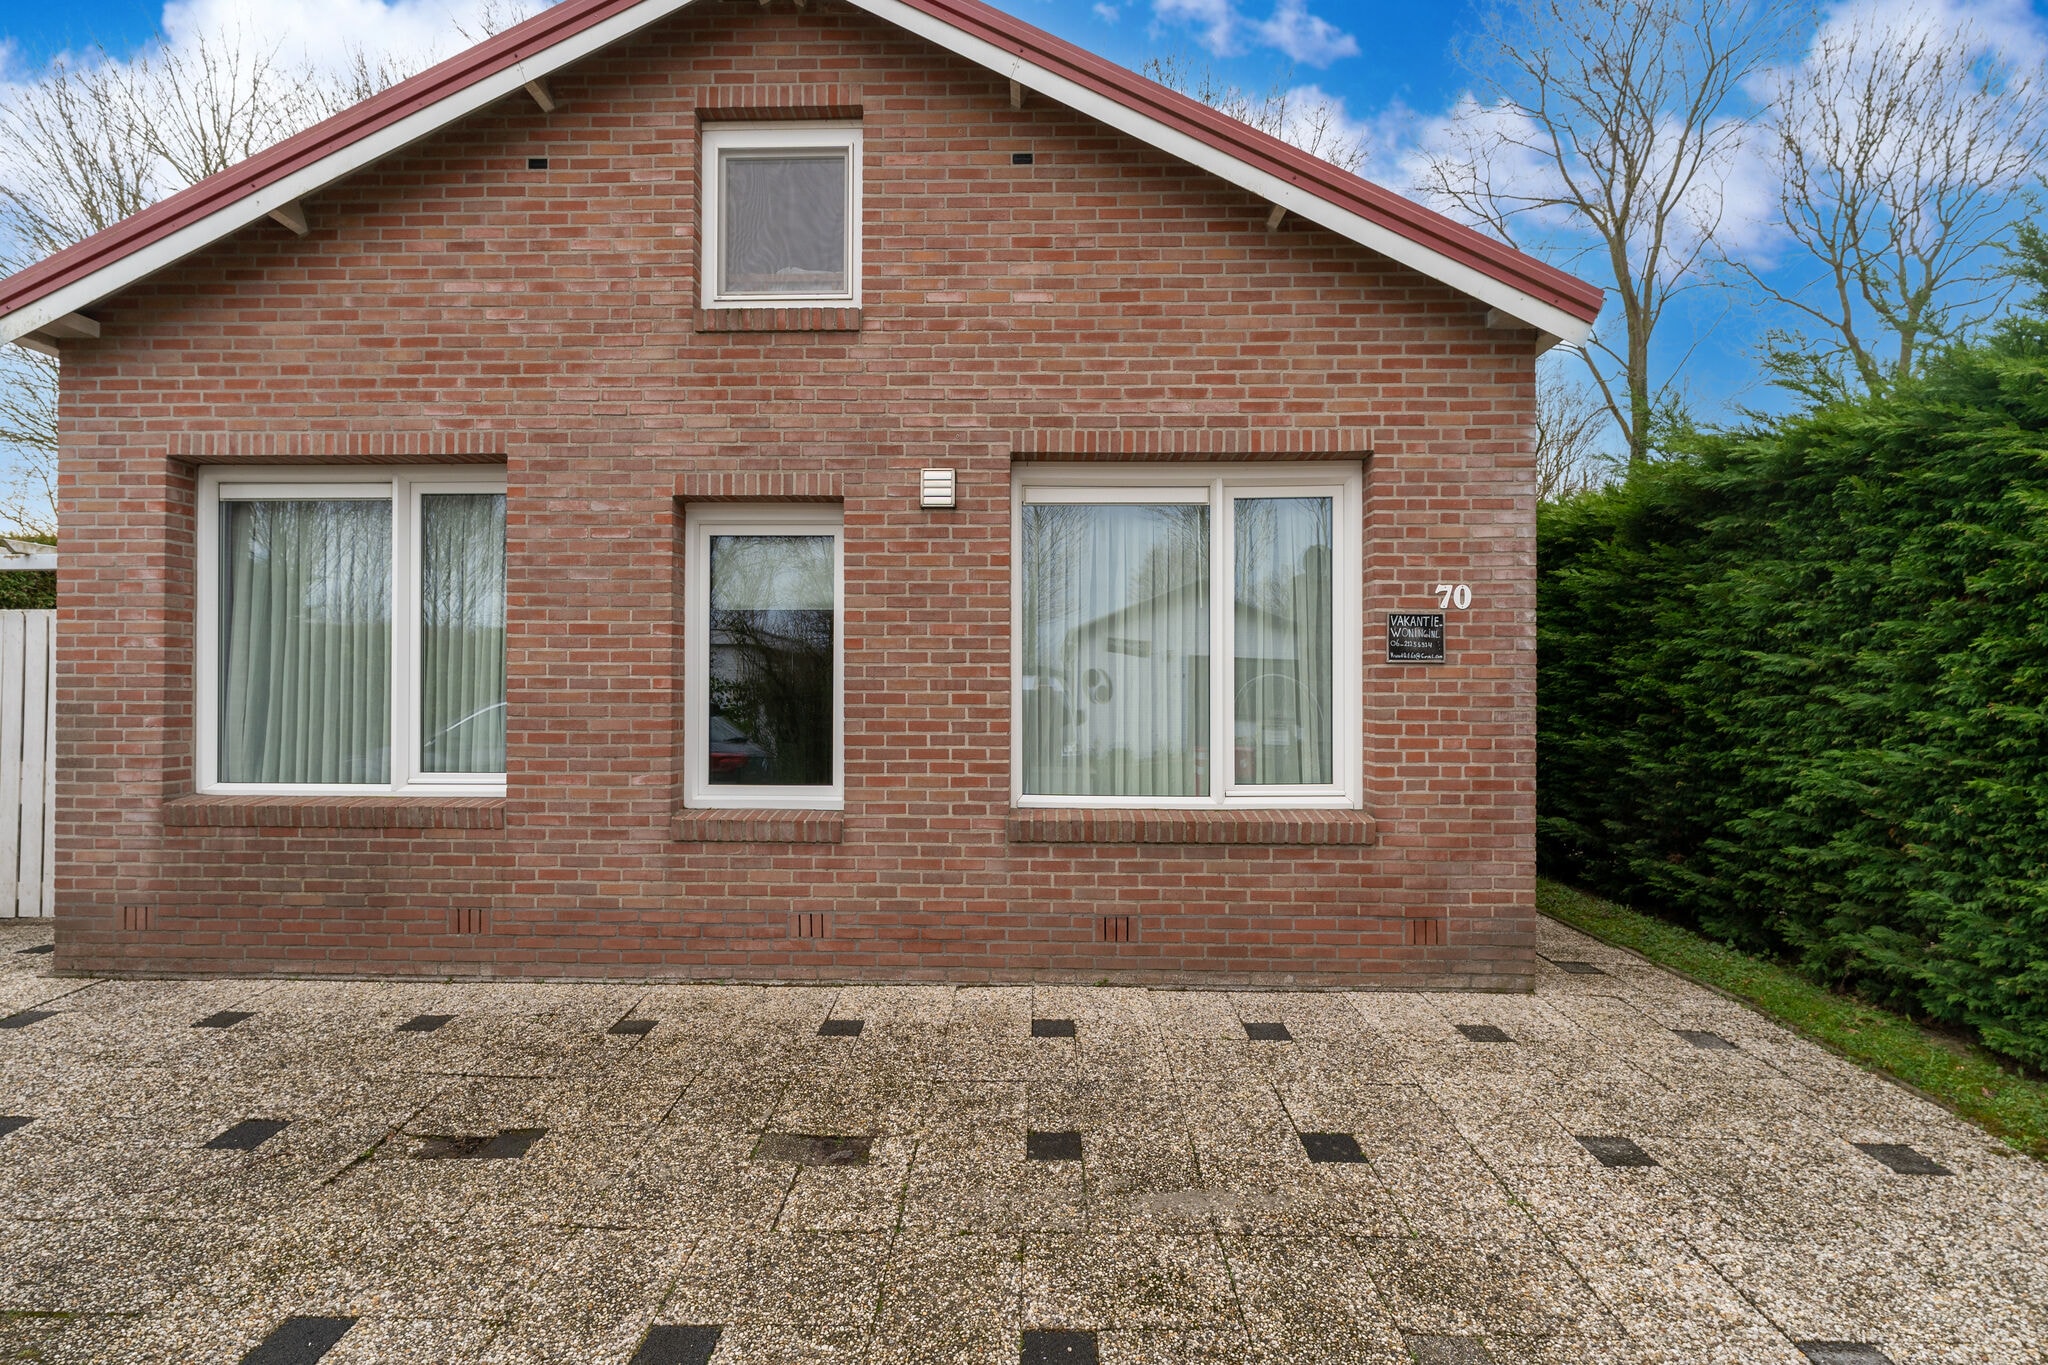 Holiday home in Baarland with fenced garden